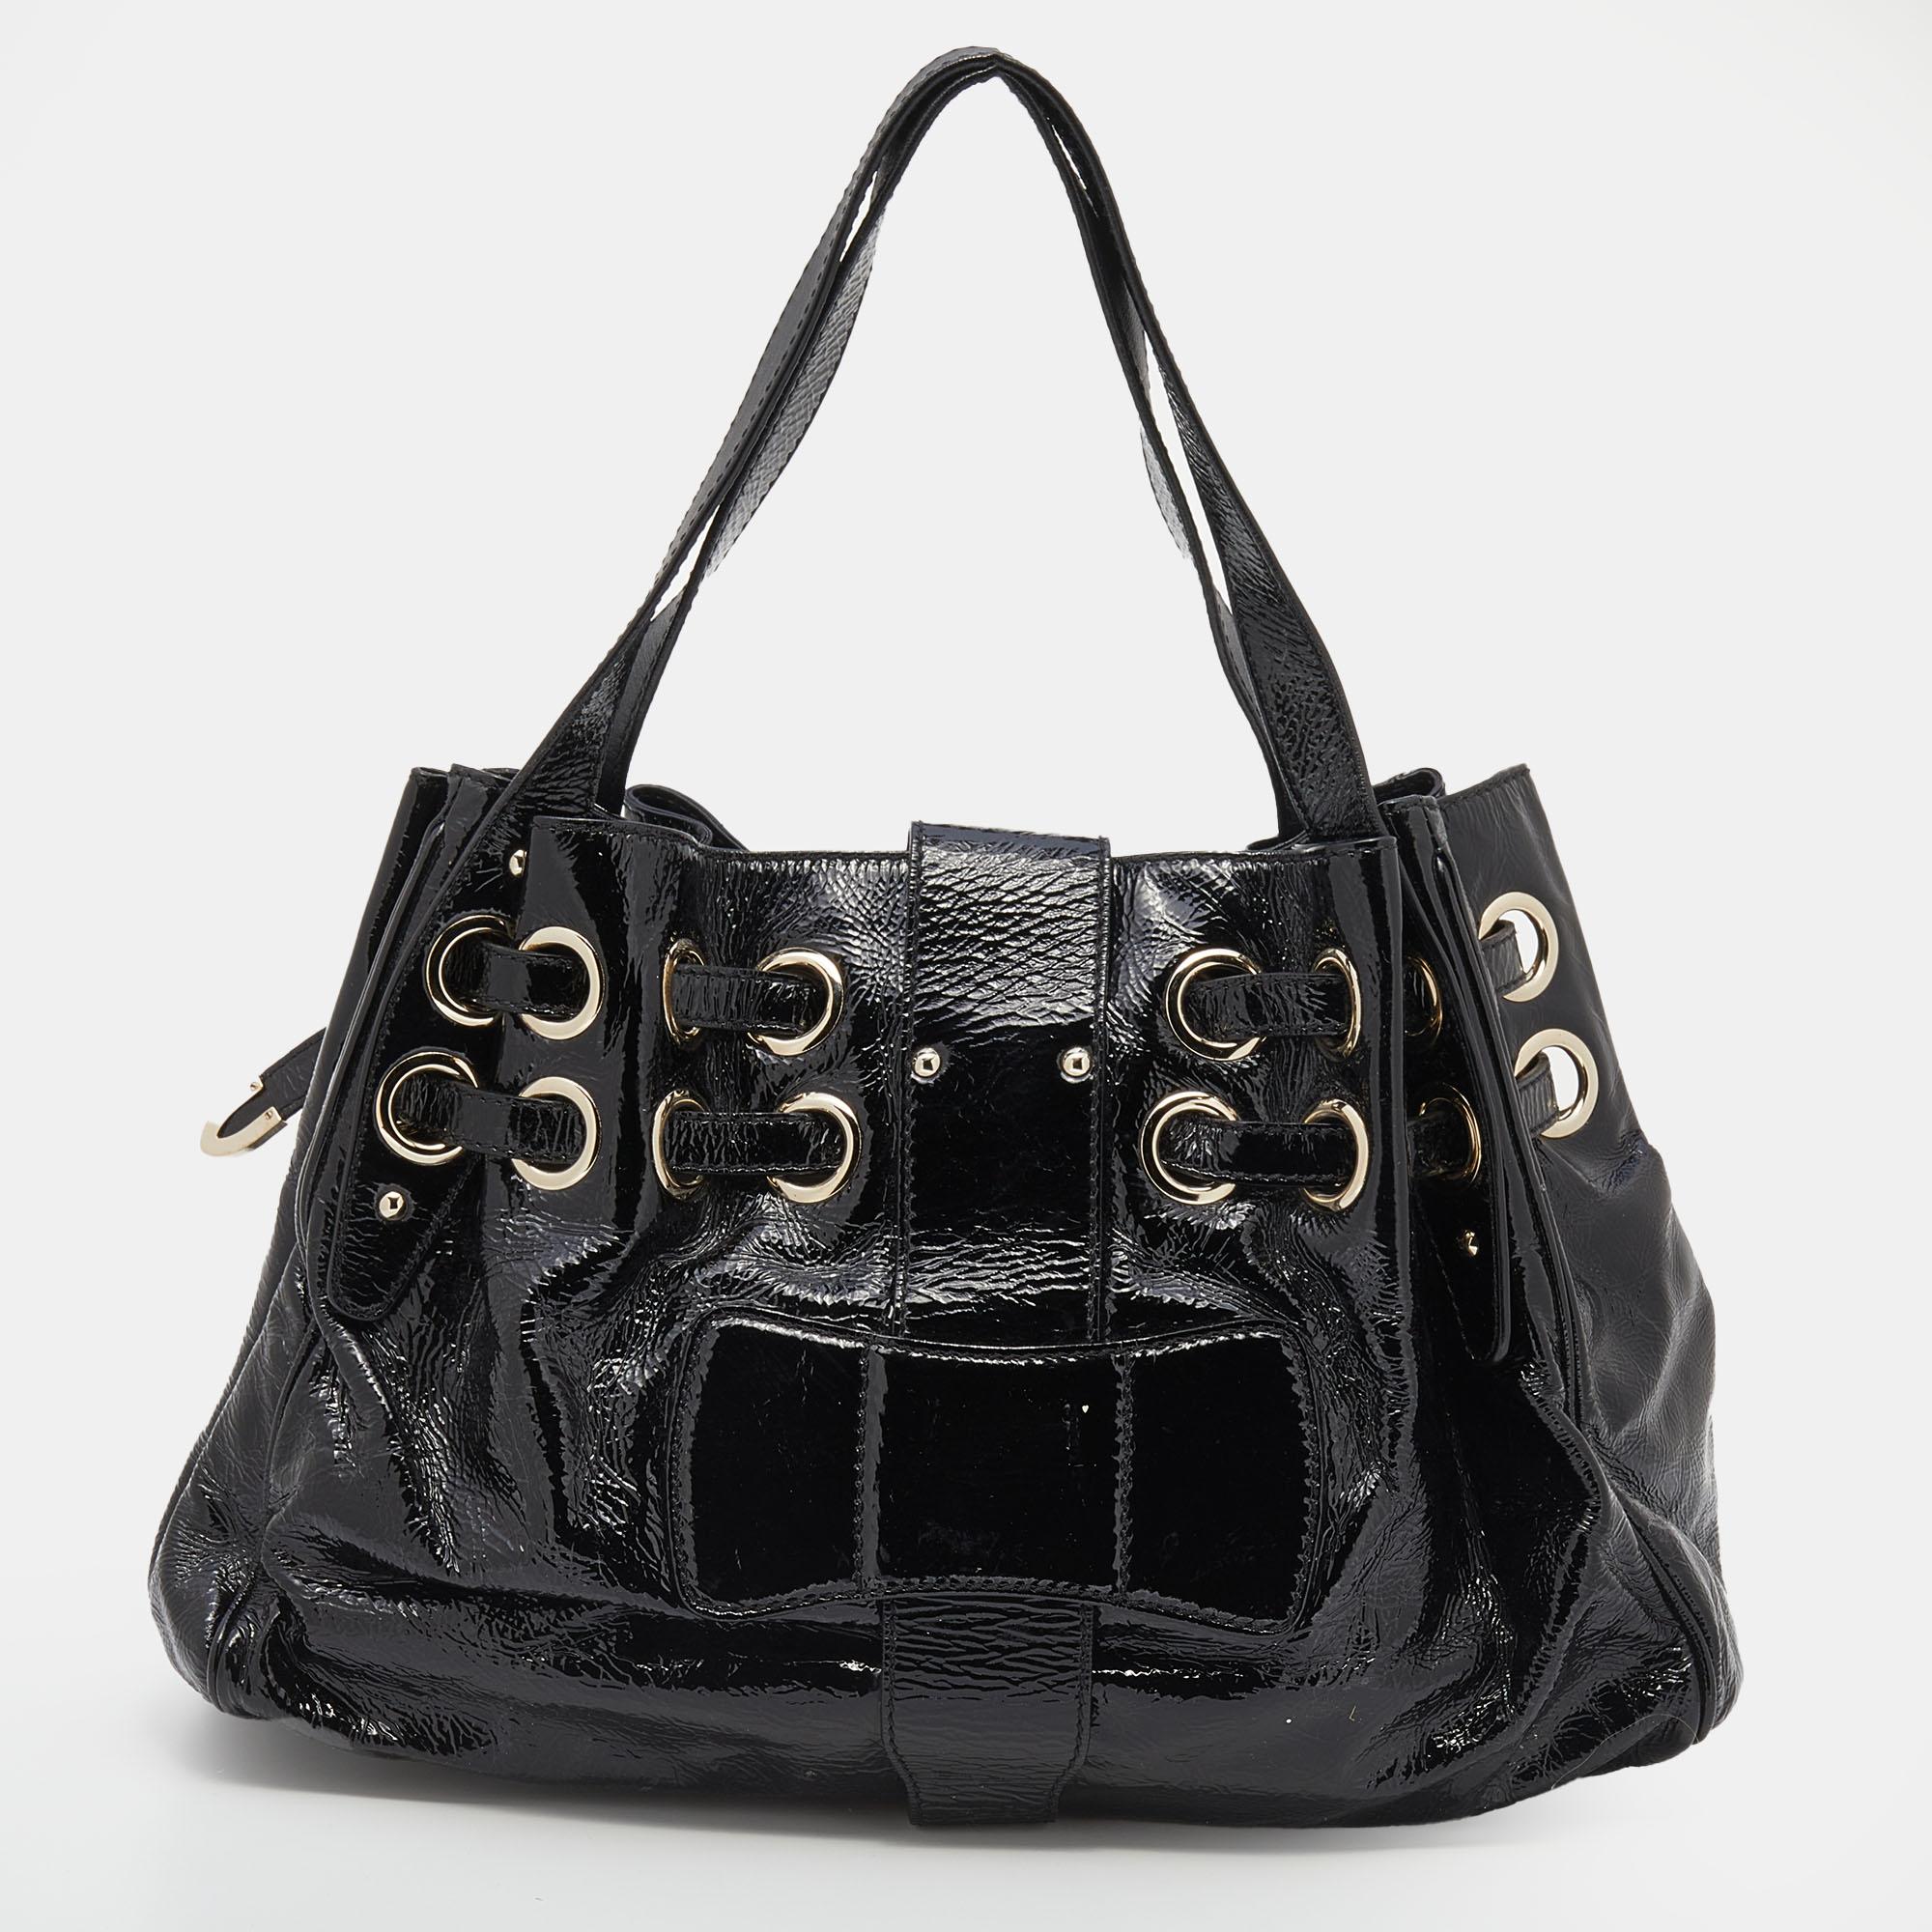 One of the most stunning creations from the House of Jimmy Choo is this Riki tote bag. It is made from black crinkled patent leather on the exterior. It features an Alcantara-lined interior and gold-tone hardware. The slightly-slouched silhouette of